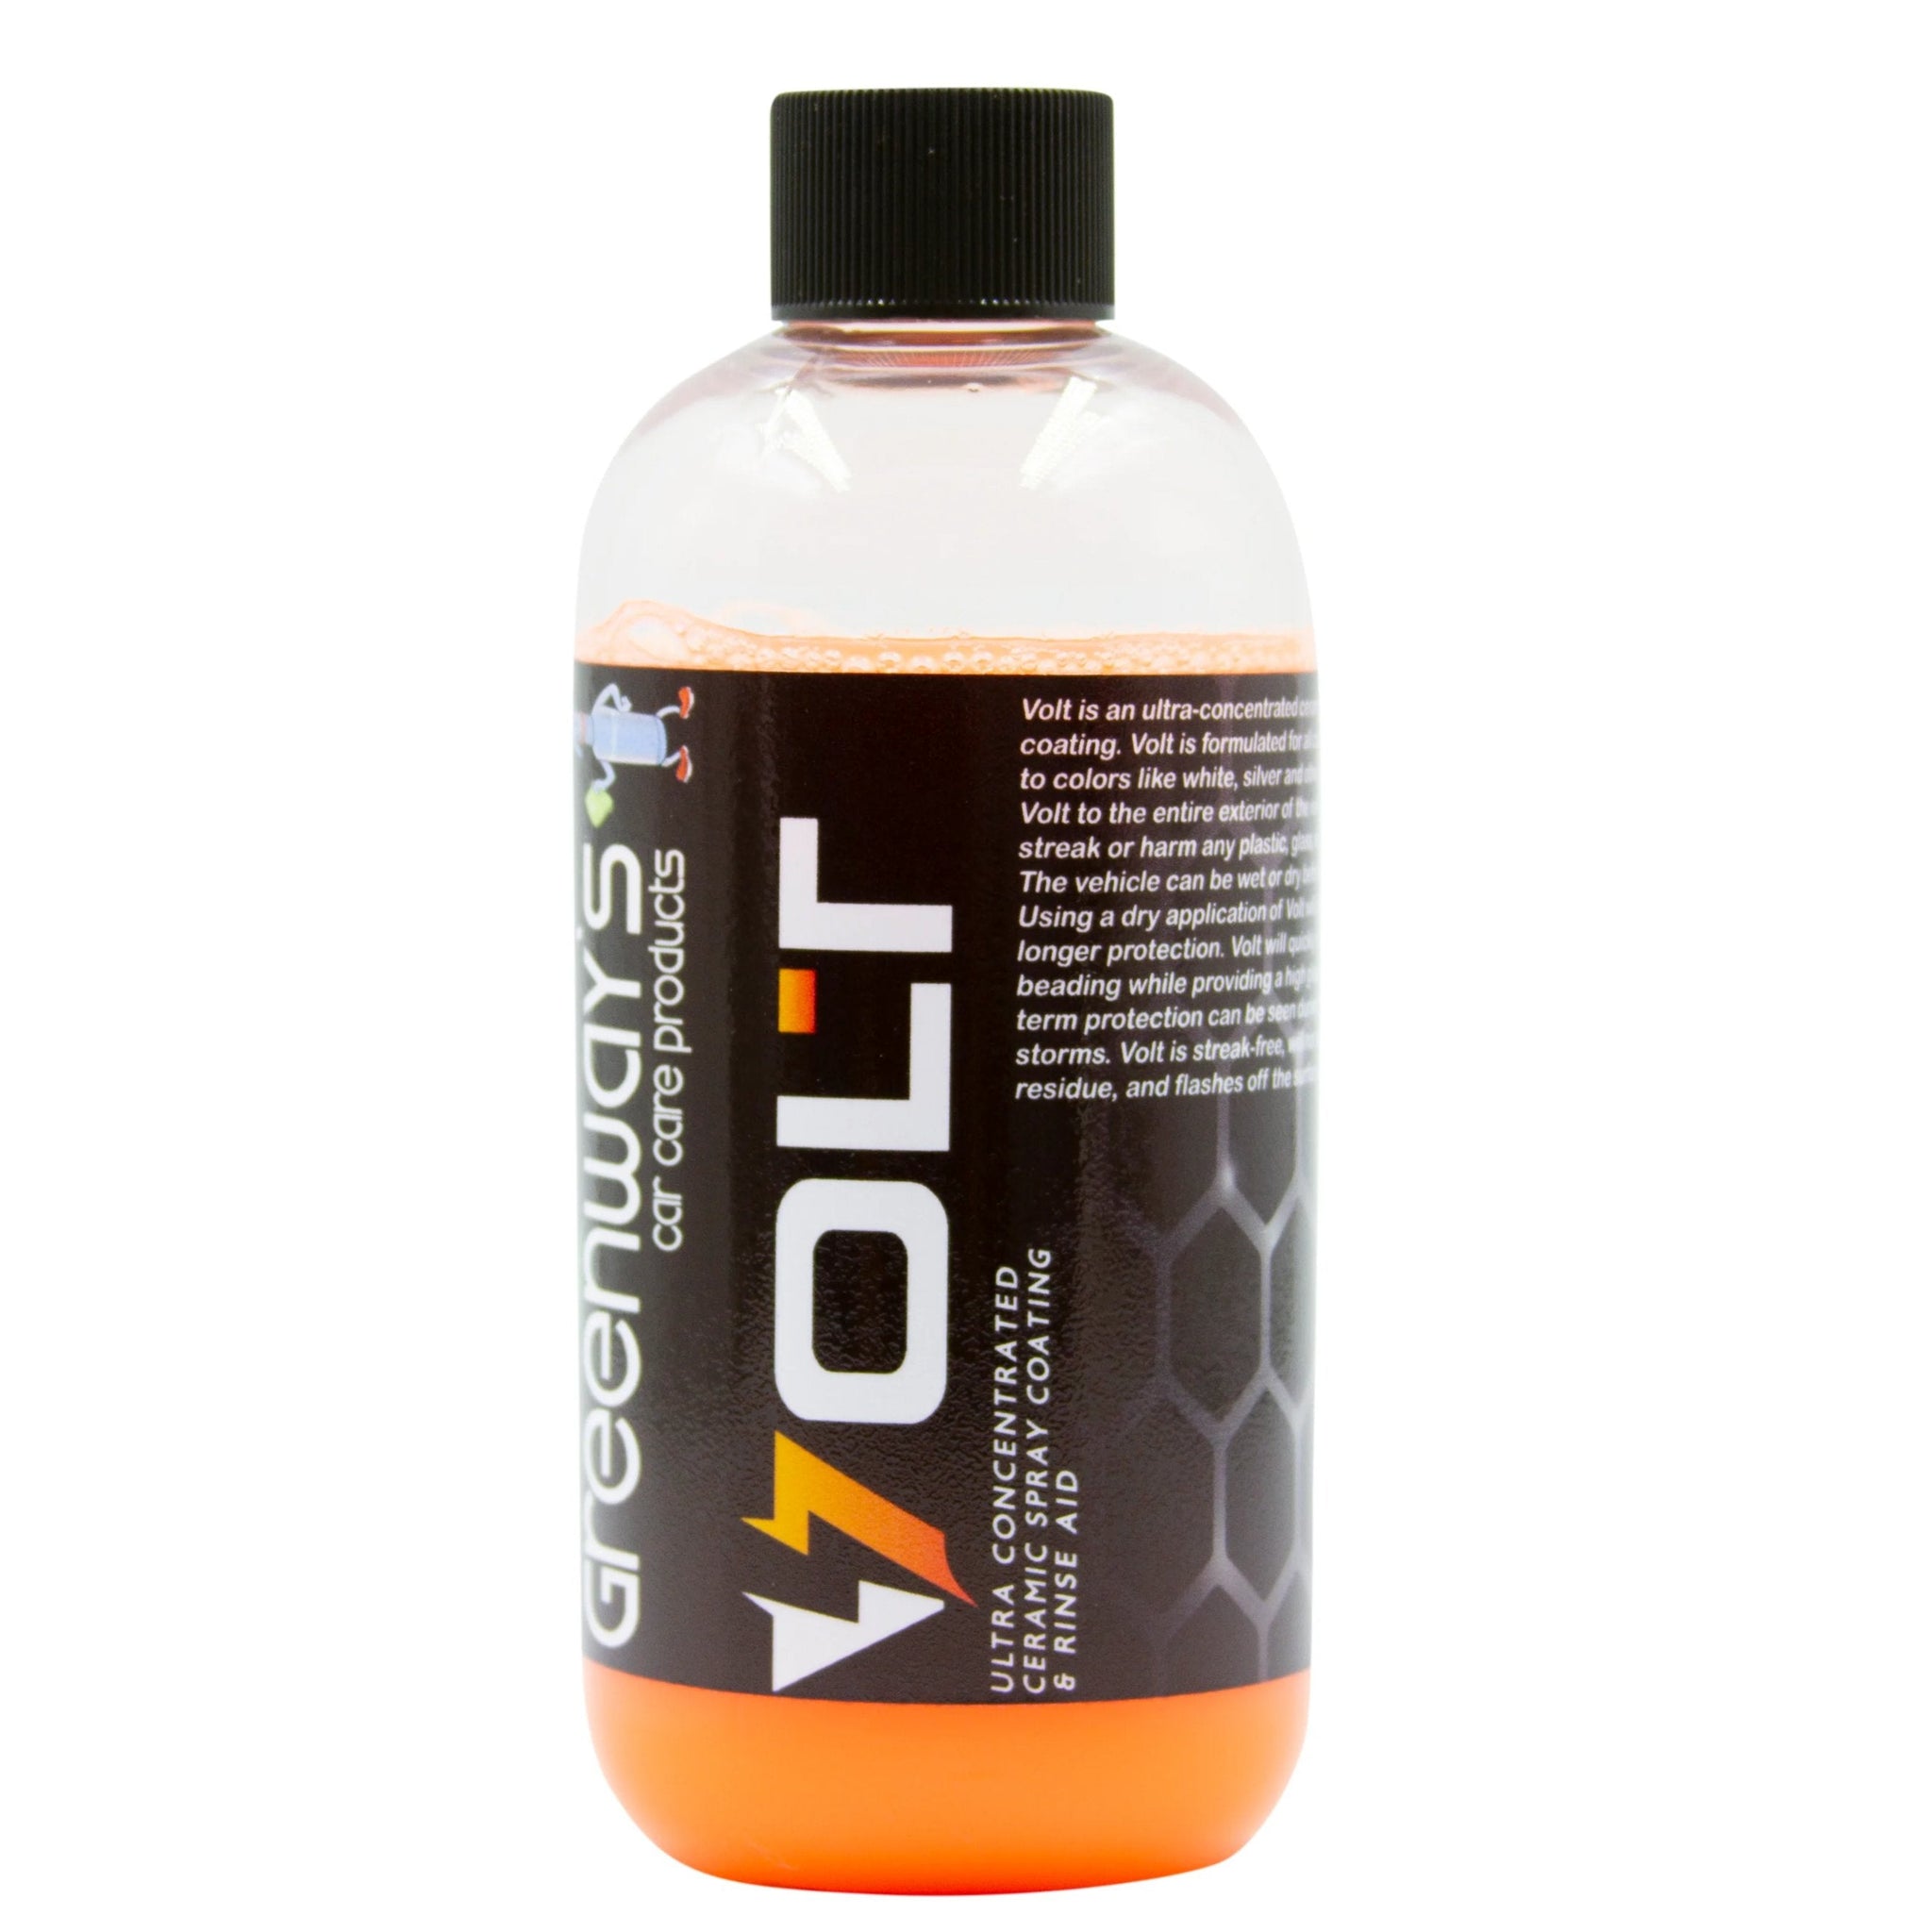 Car Ceramic Coating Concentrate Makes 1 Gallon of RTU product